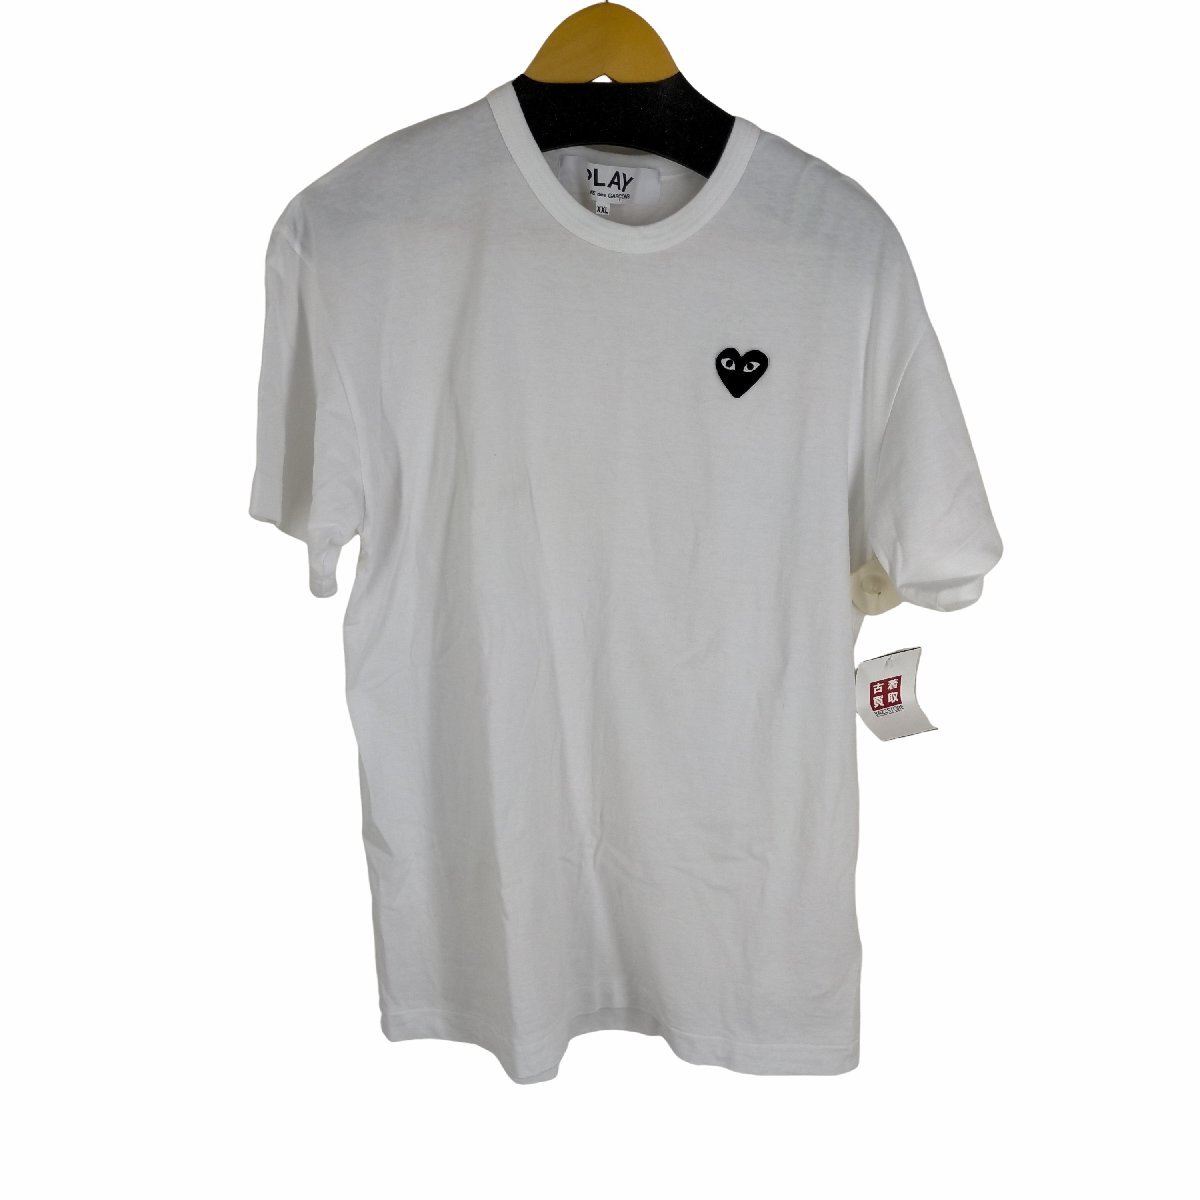 PLAY COMME des GARCONS(プレイコムデギャルソン) PLAY CDG: T-Shirt 中古 古着 0846_画像1